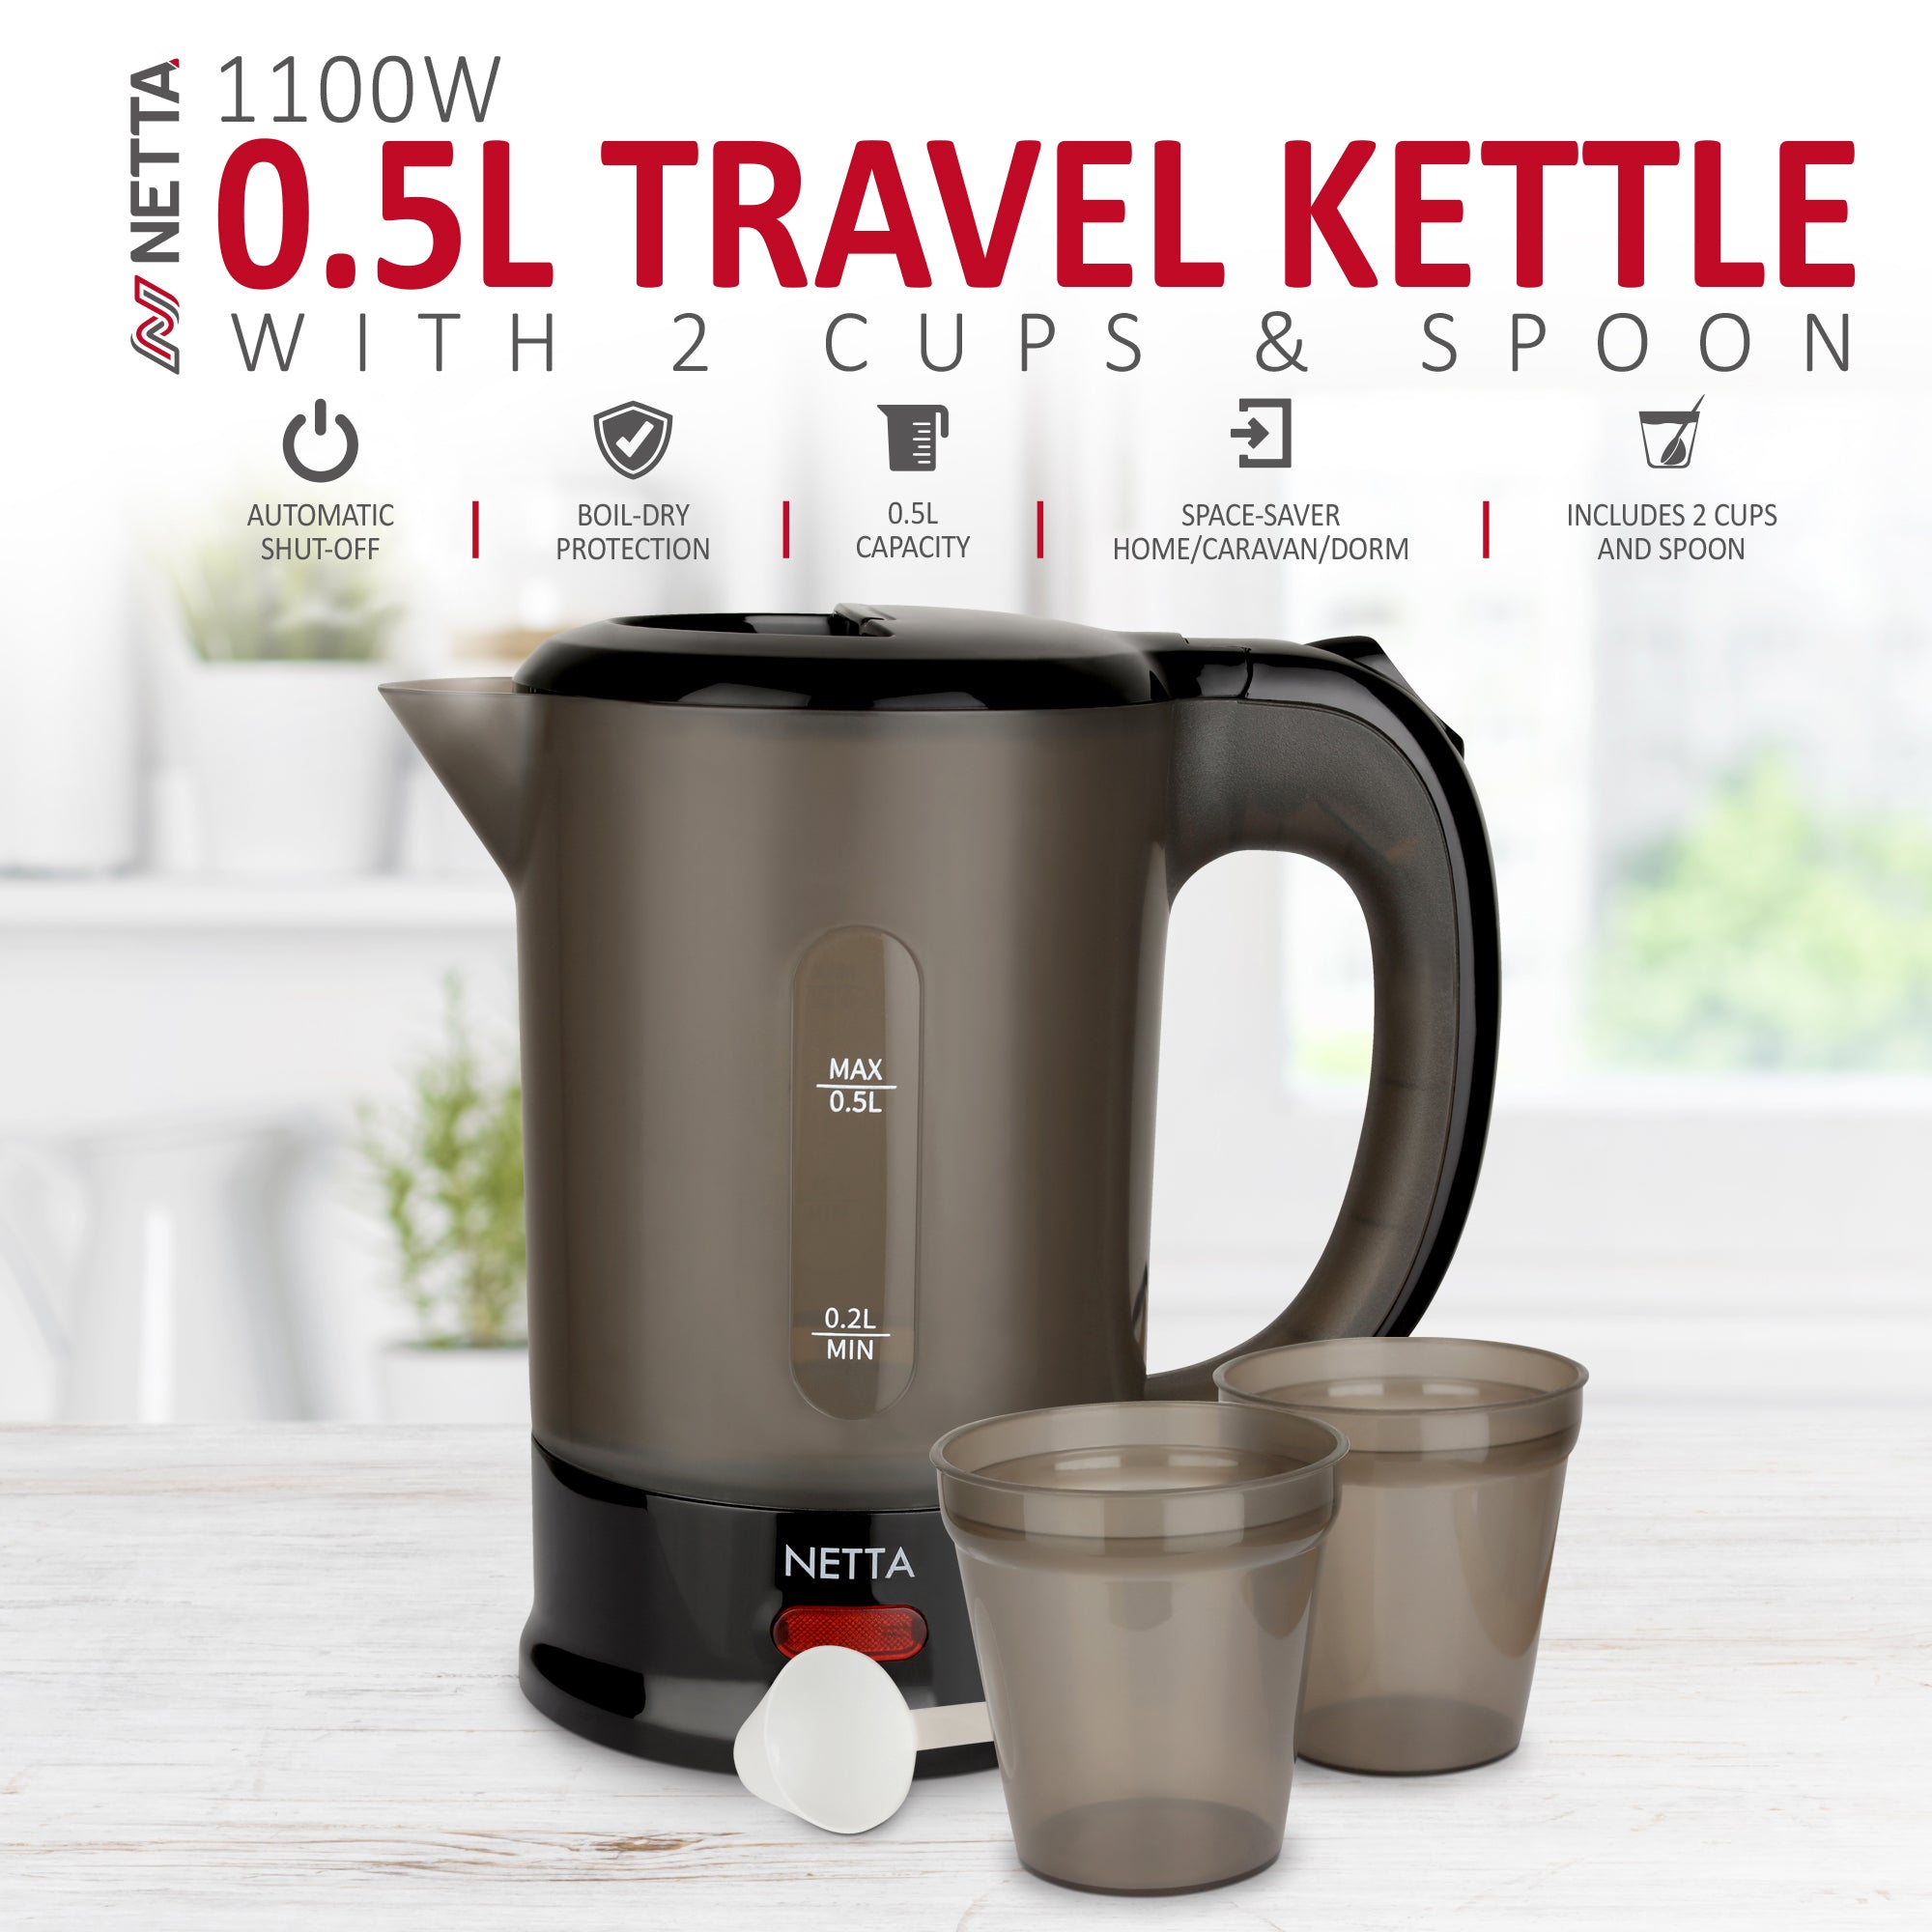 NETTA 0.5L Travel Kettle with 2 Cups - 1100W